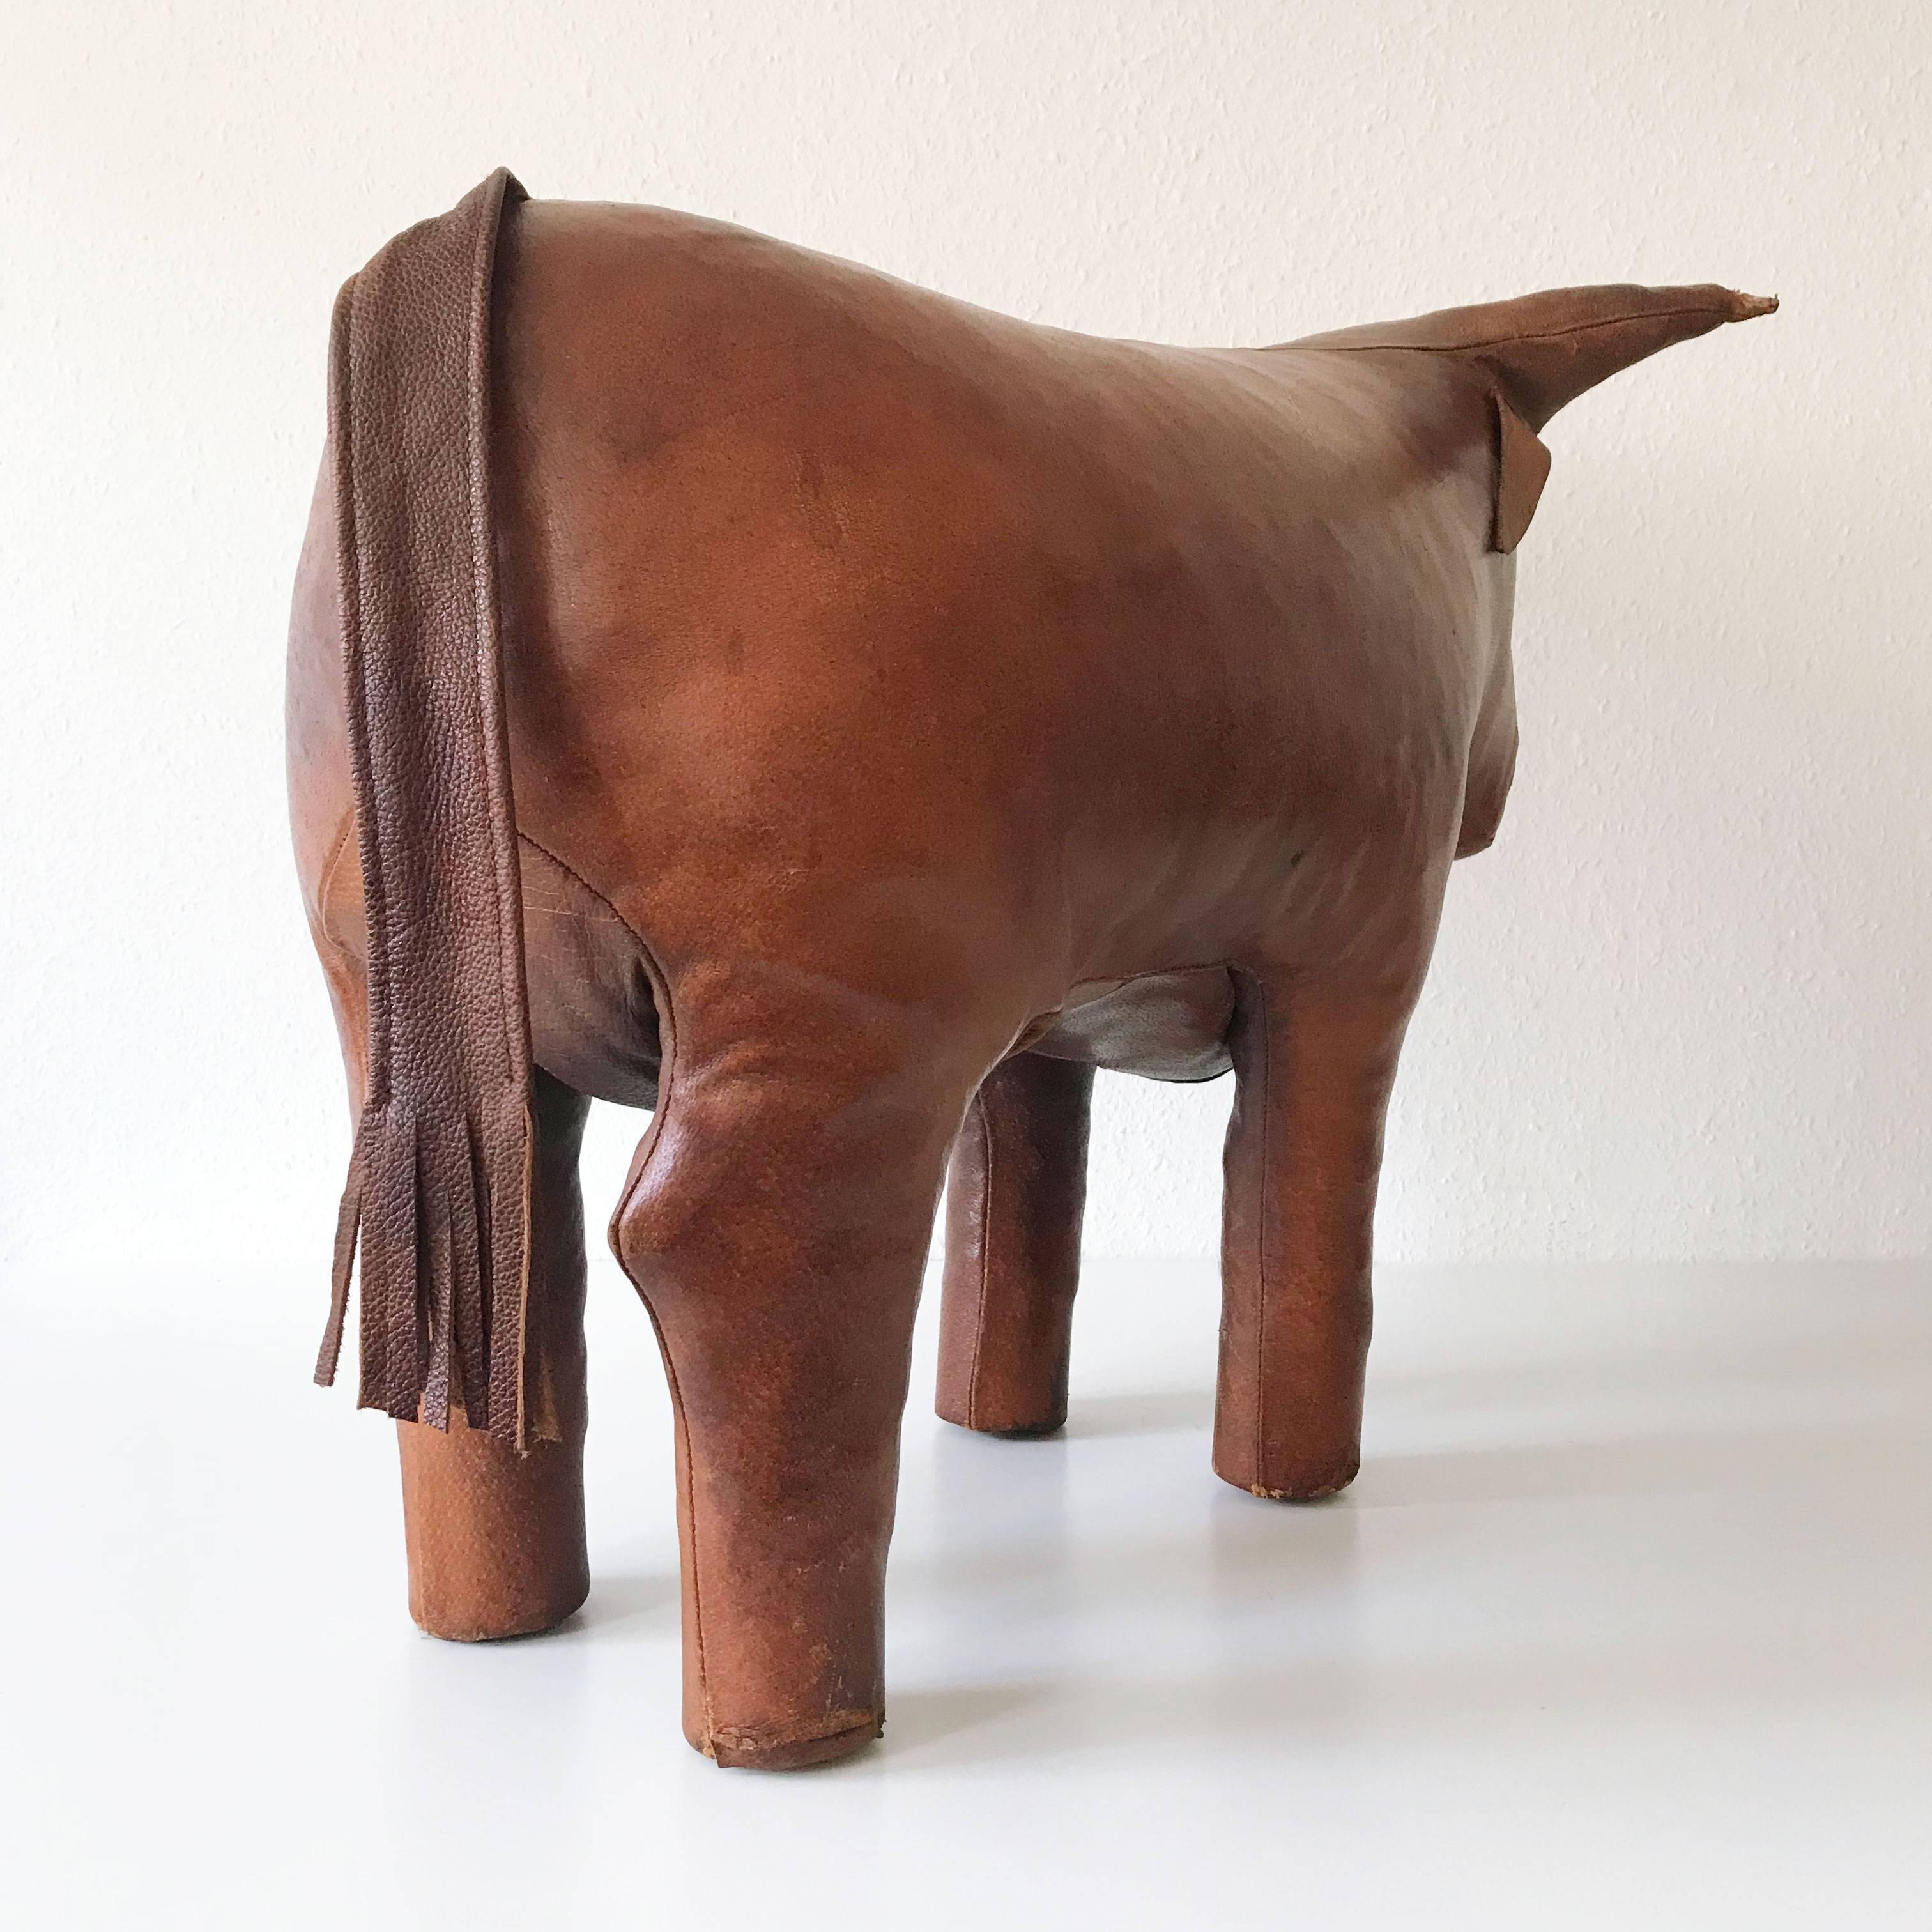 Original Leather Bull Footstool or Ottoman by Dimitri Omersa, 1960s, England 1